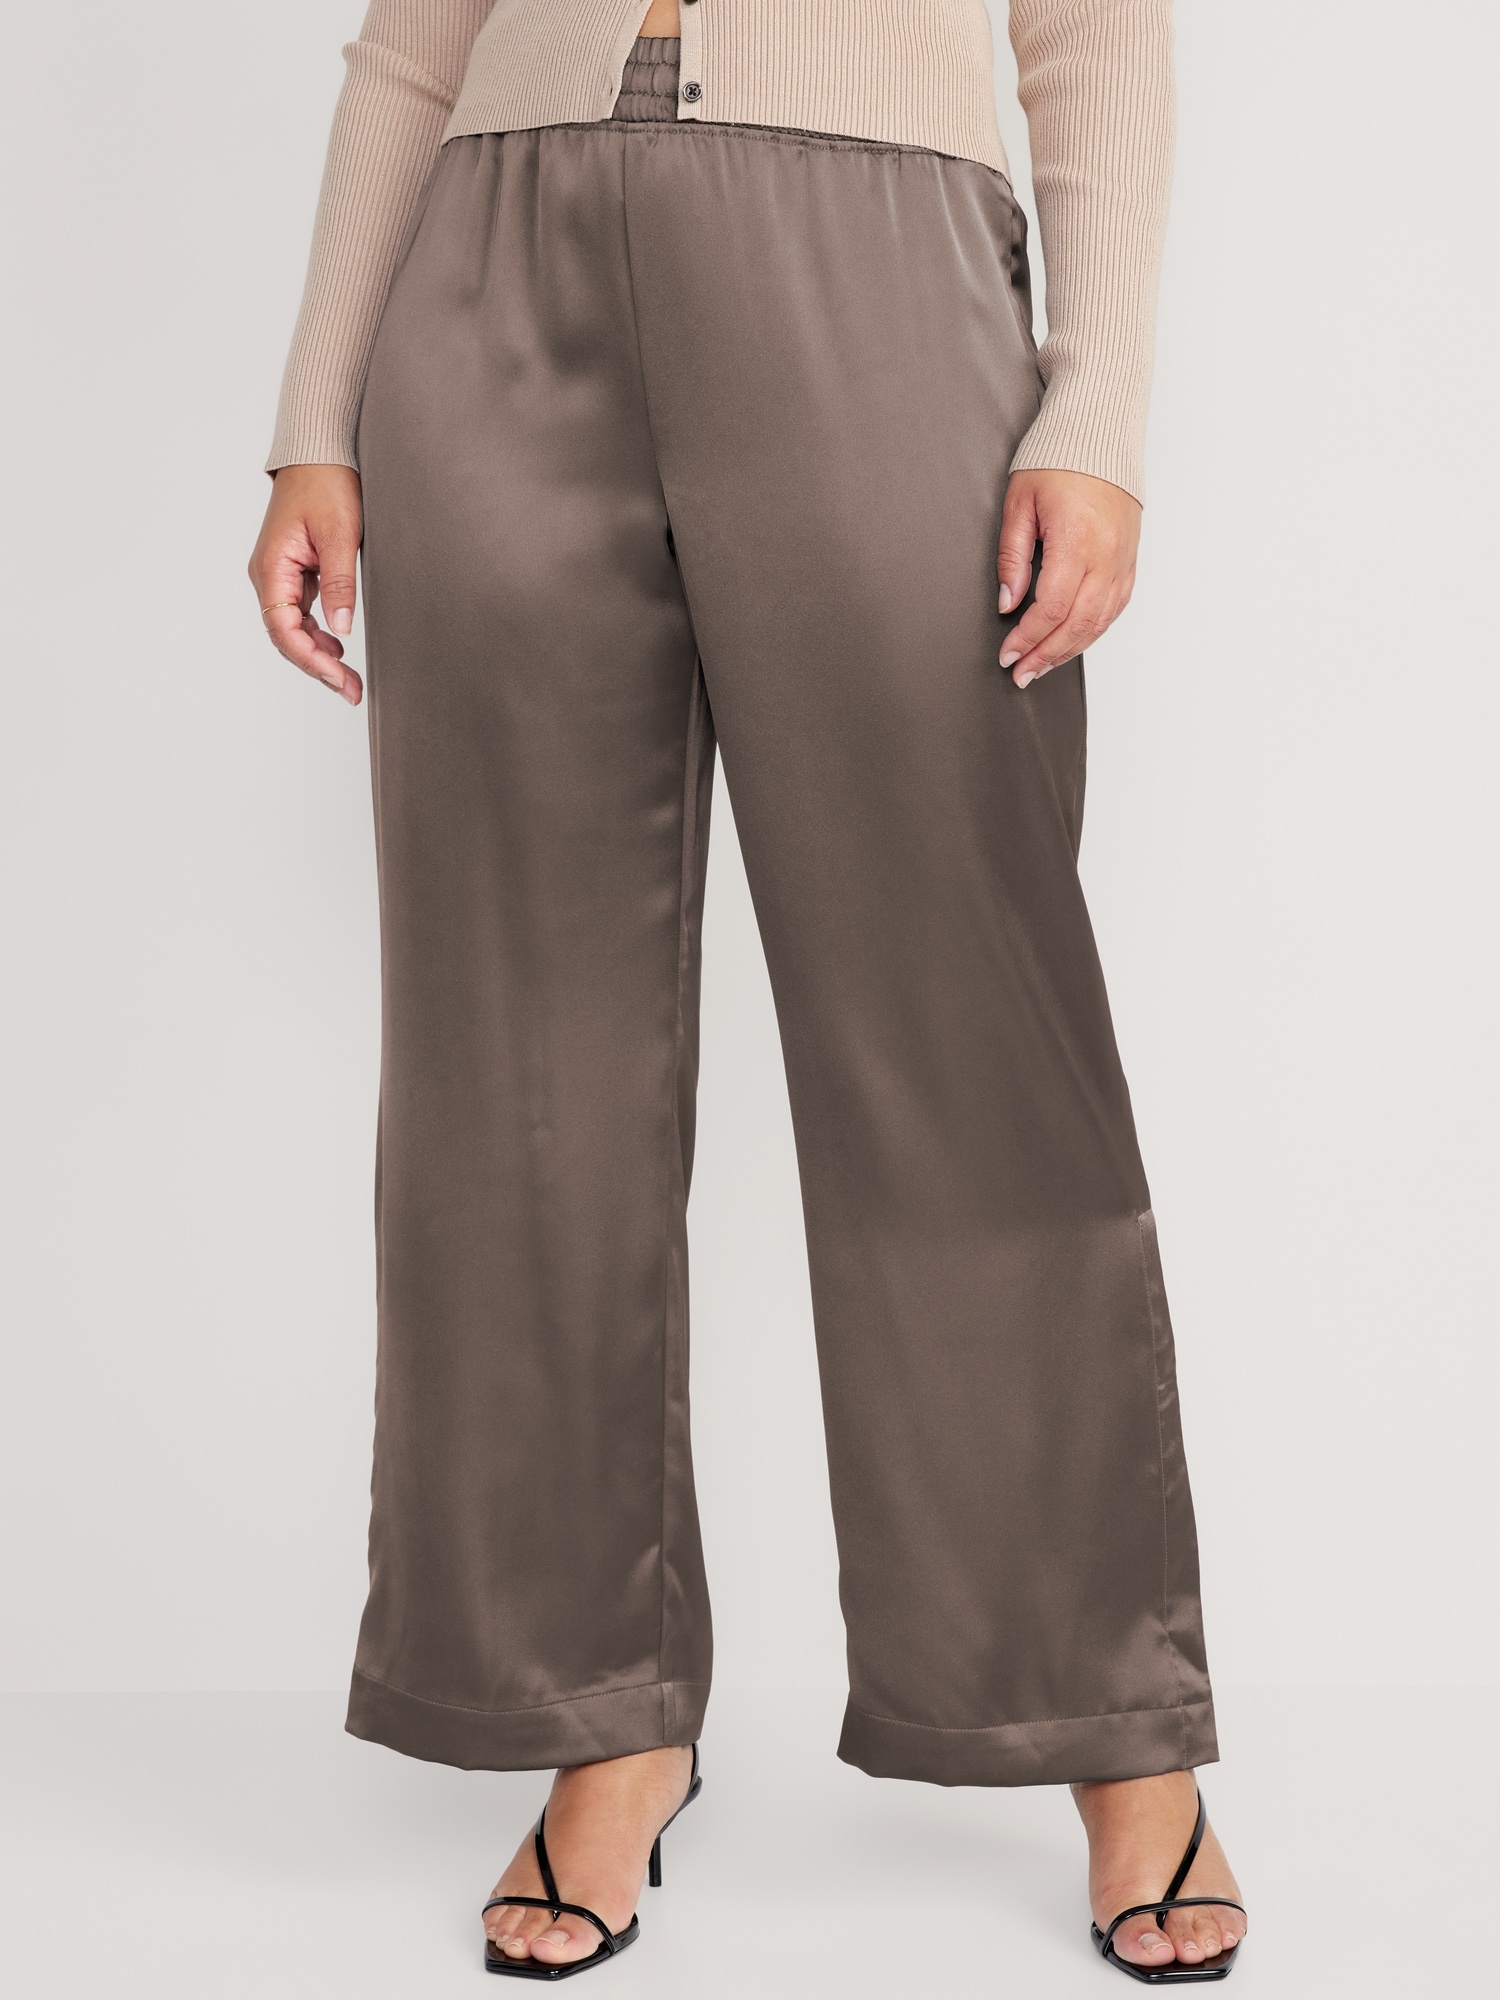 Mid Rise Wide Leg Satin Track Pants for Women   Old Navy